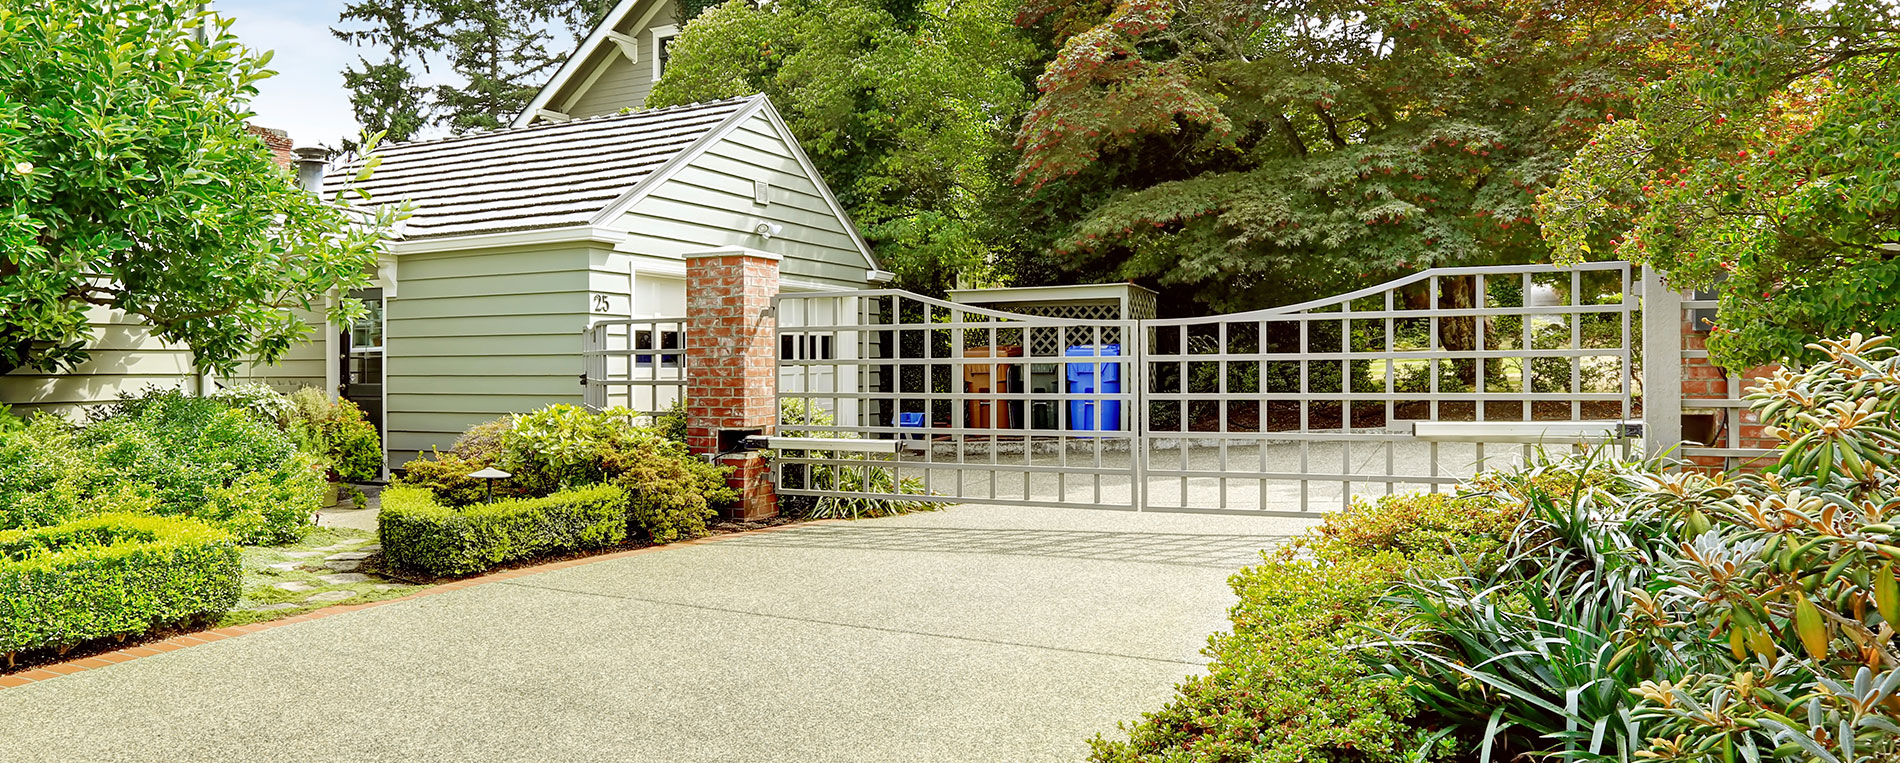 Different Types Of Security Gates For Residential Properties